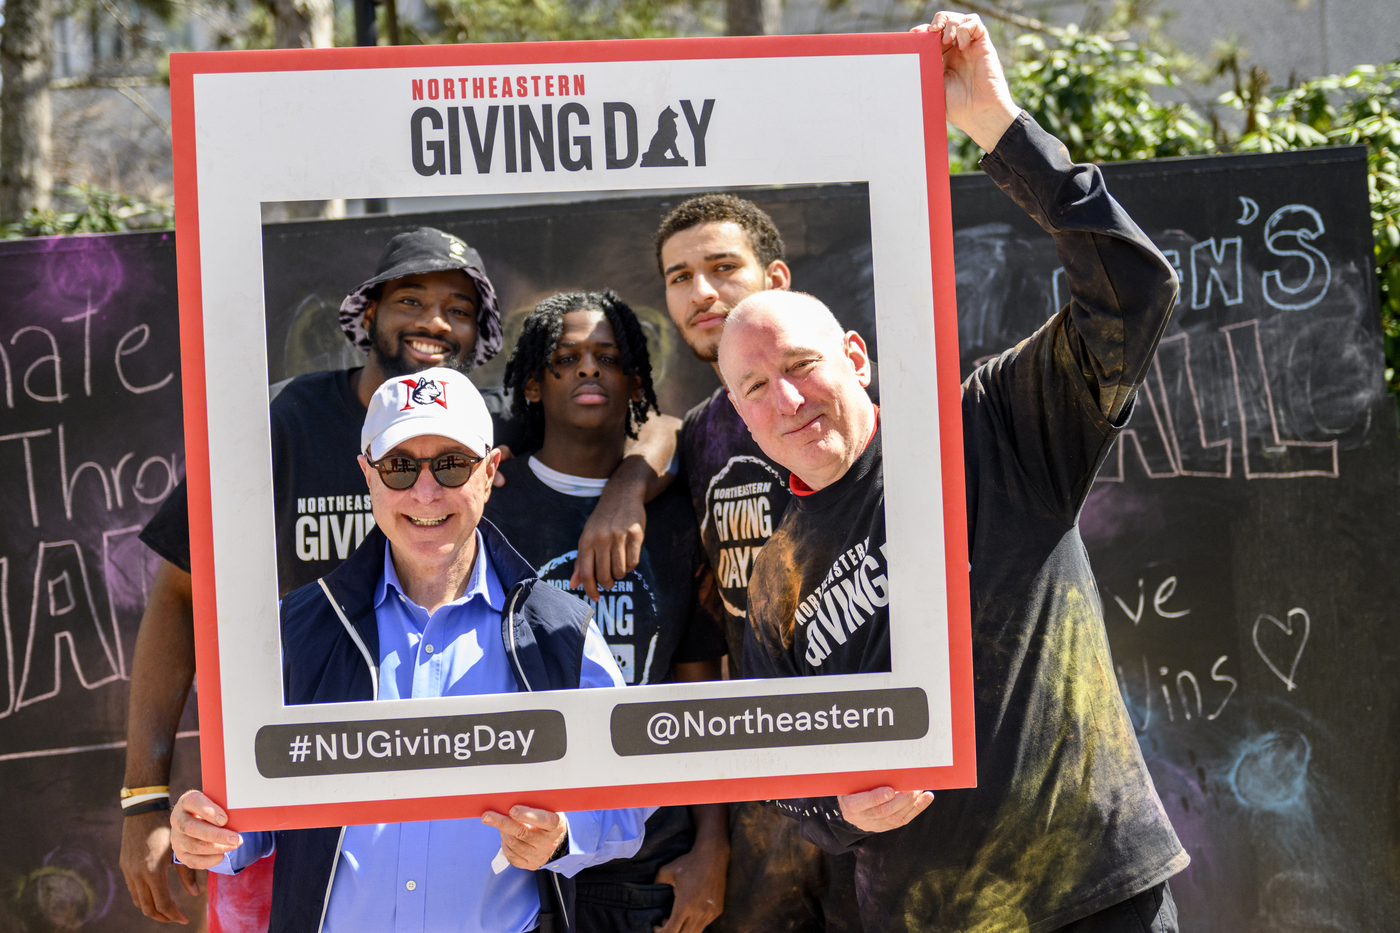 Northeastern’s annual Giving Day has become a global participation event, raising $3.2 million from more than 10,000 donors from 35 countries in 2023.